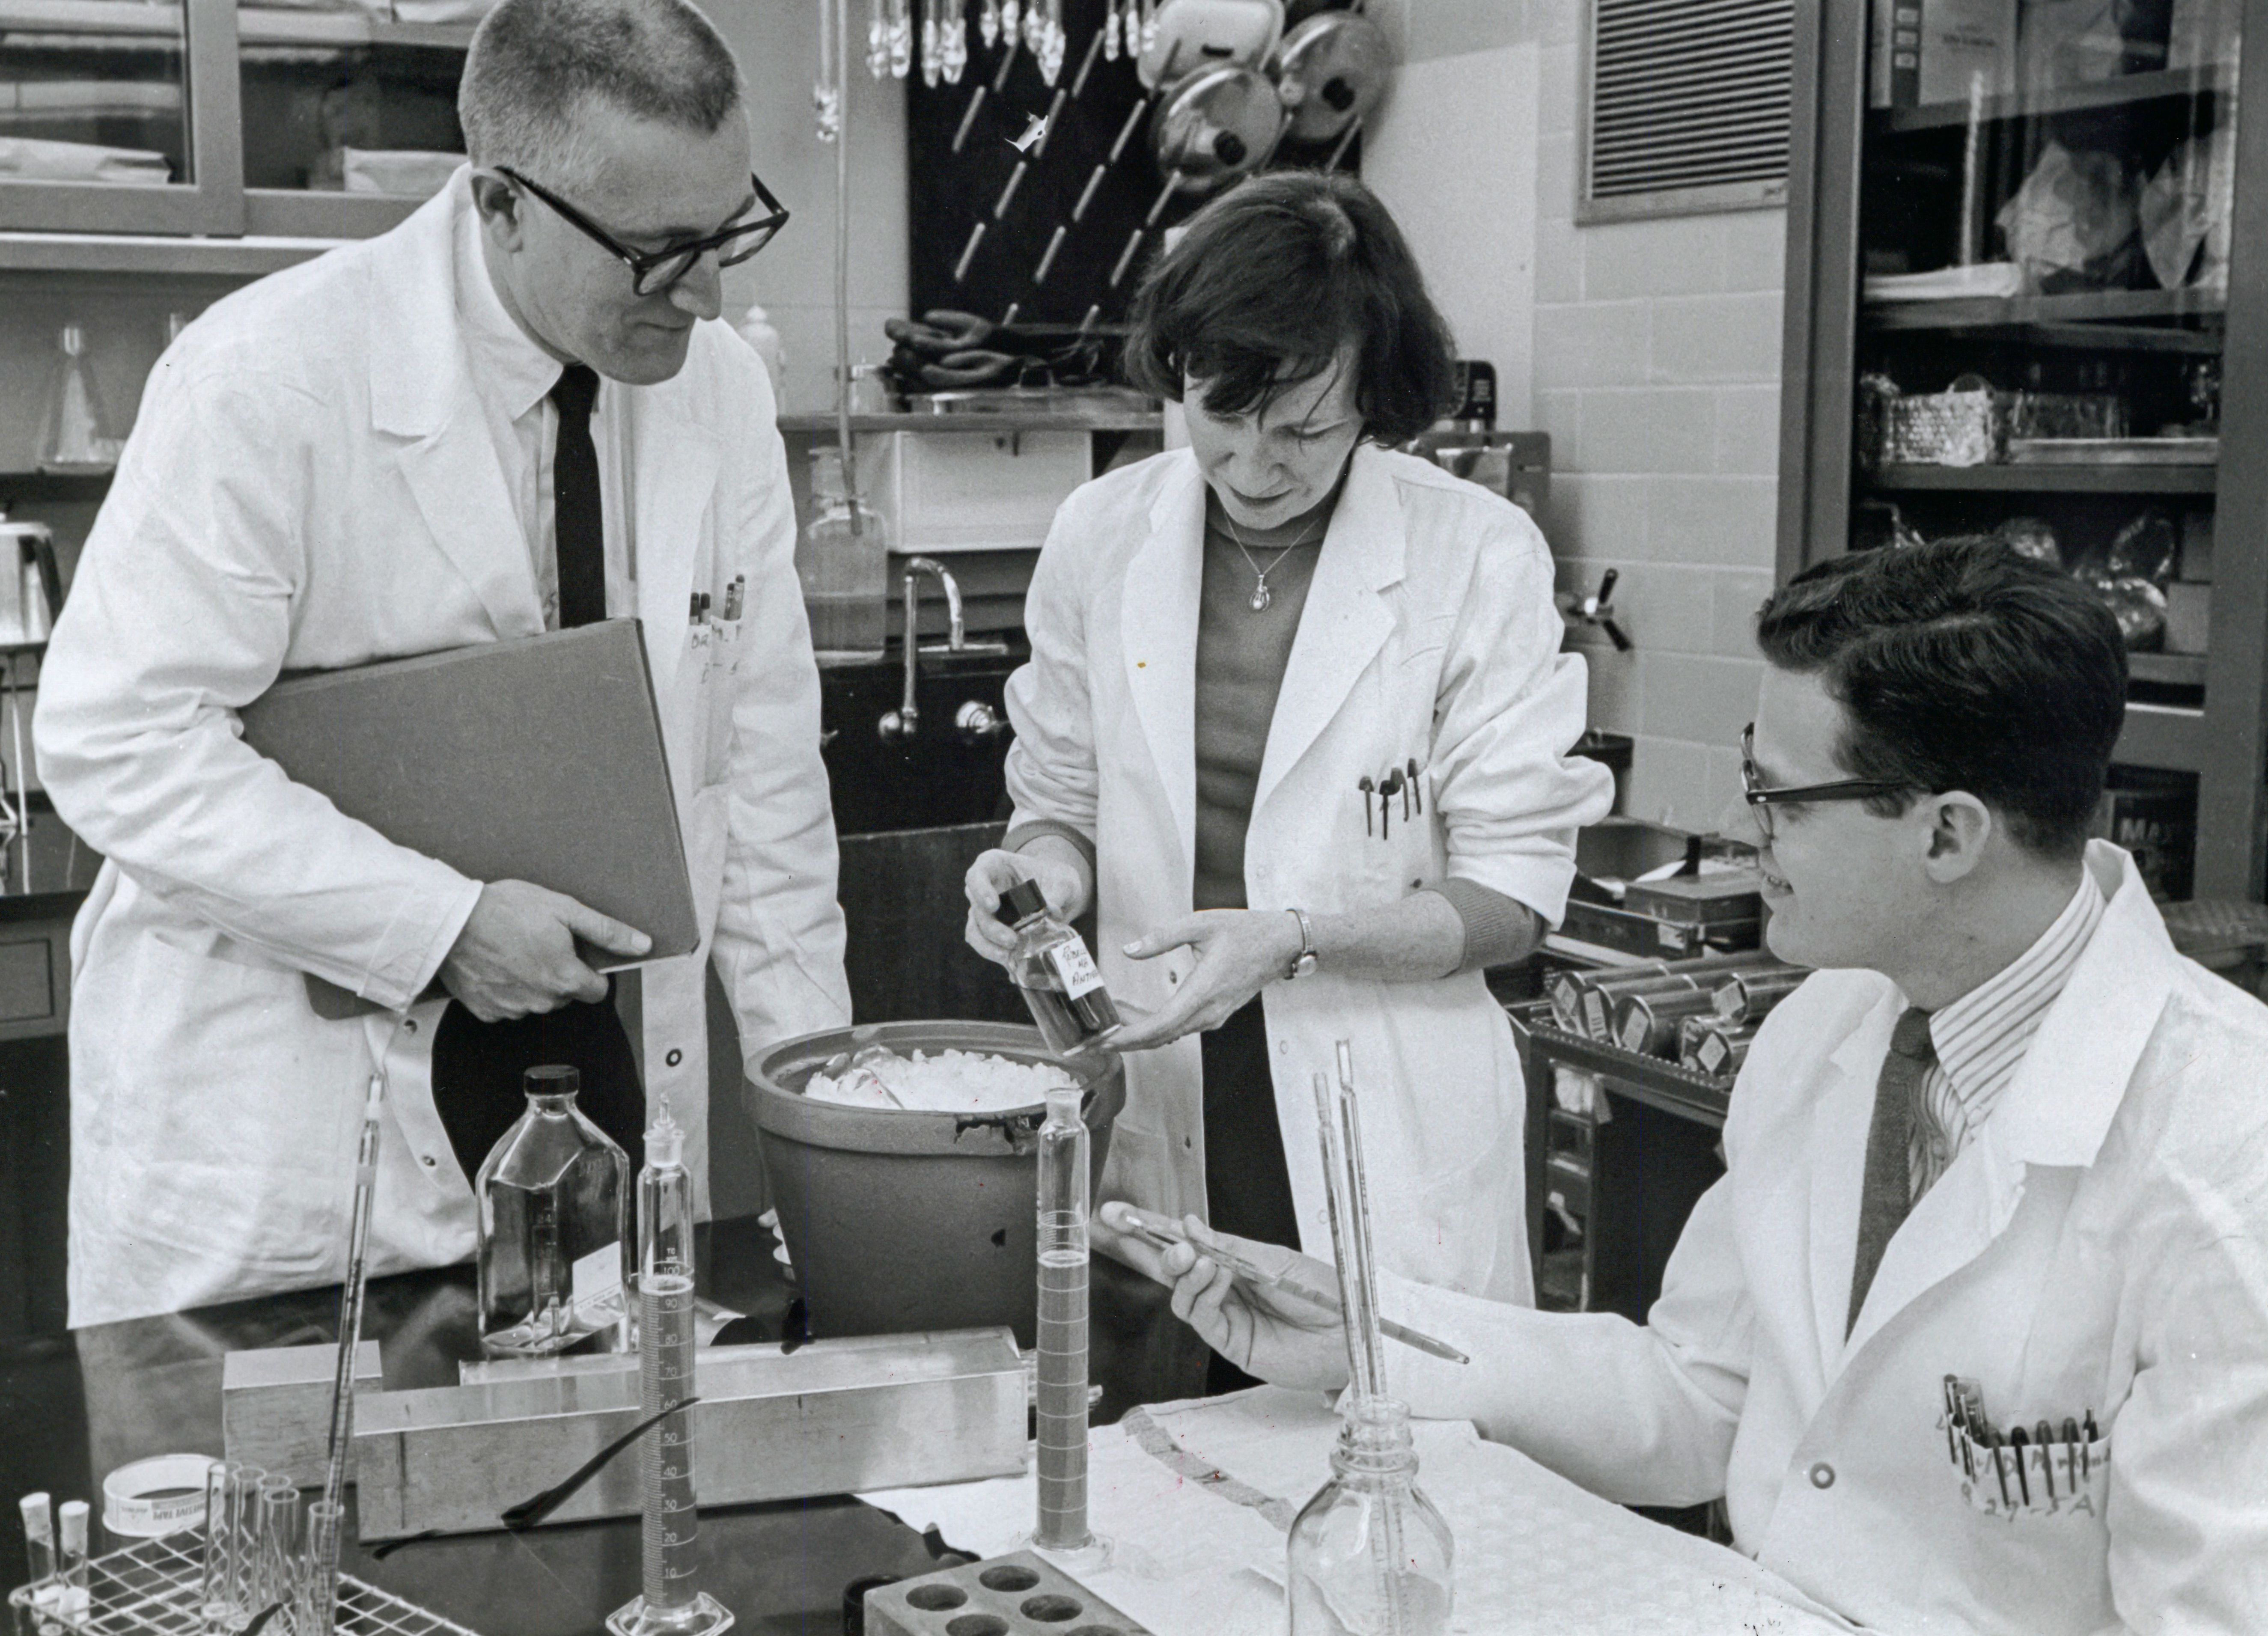 a photo of two men and one woman, Hope Hopps, in a lab, wearing white lab coats